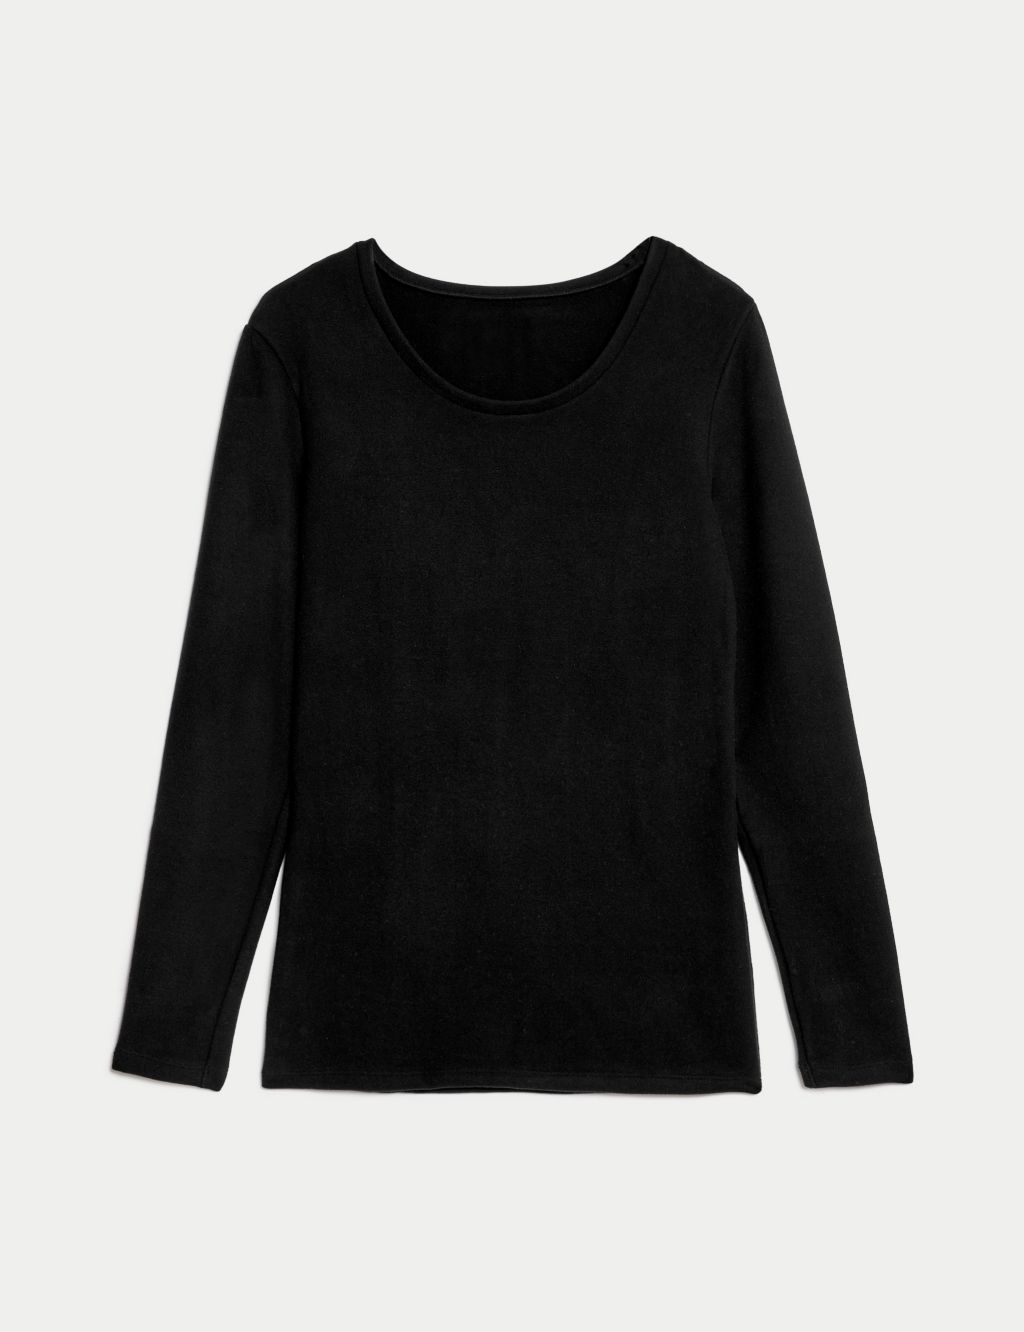 Buy Black Next Elements Thermal Fleece Lined Long Sleeve Top from Next  Luxembourg